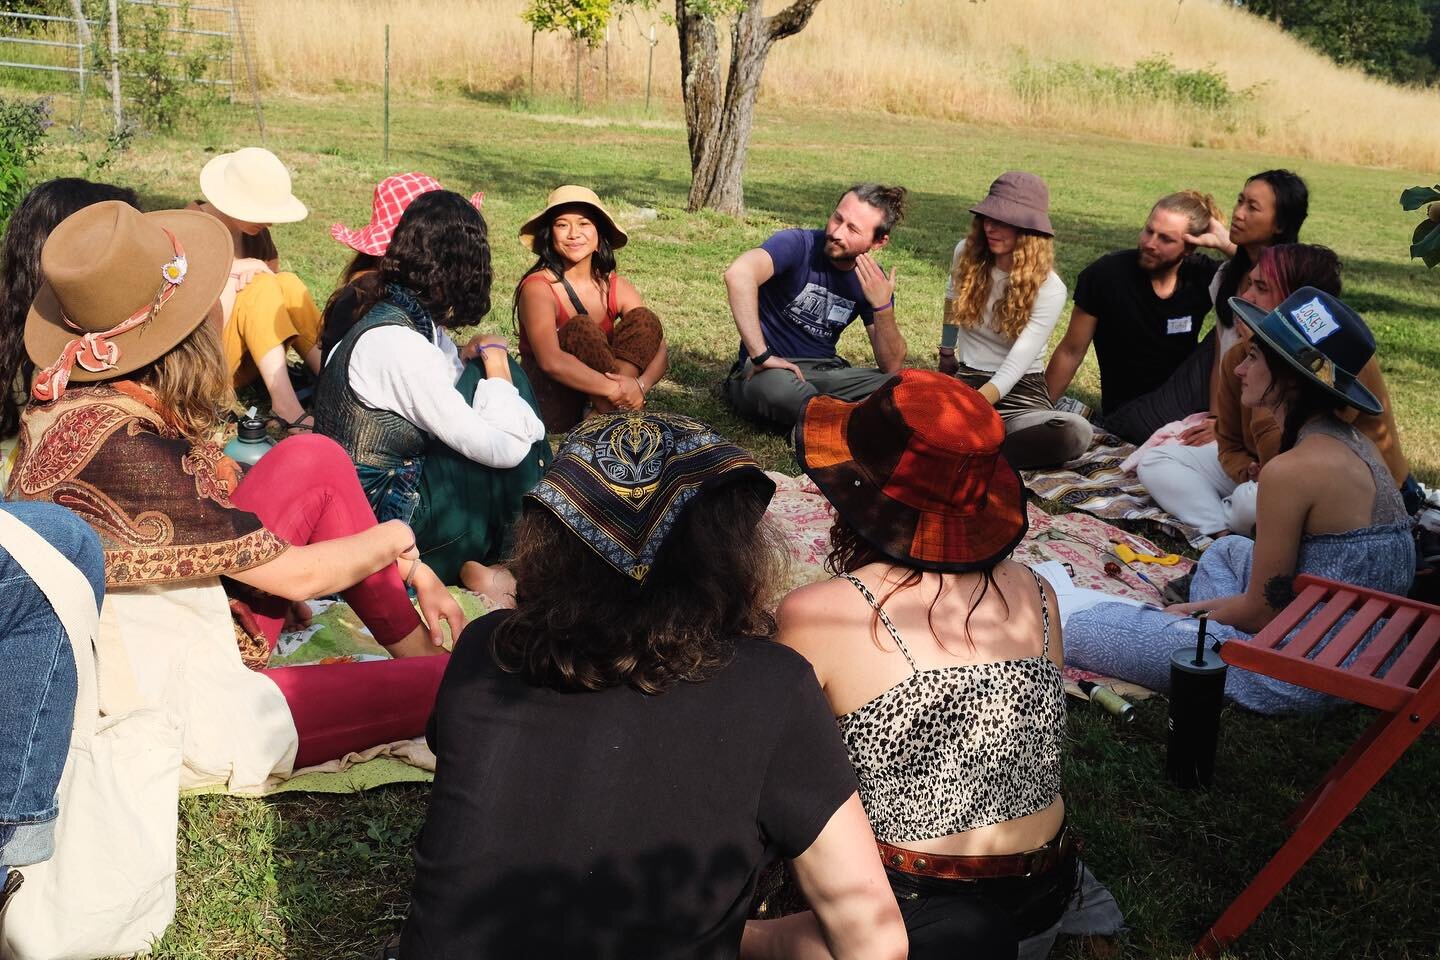 🌟🌟4 MORE DAYS OF OUR $100 OFF EARLY BIRD DISCOUNT!! 🌟🌟Join us for the @integracollective &amp; @kisbotanicals EARTH BODY SPIRIT course in Chapel Hill,NC ✨🤍🌱

Are you ready for a weekend of connection, community, and deep learning about your bod